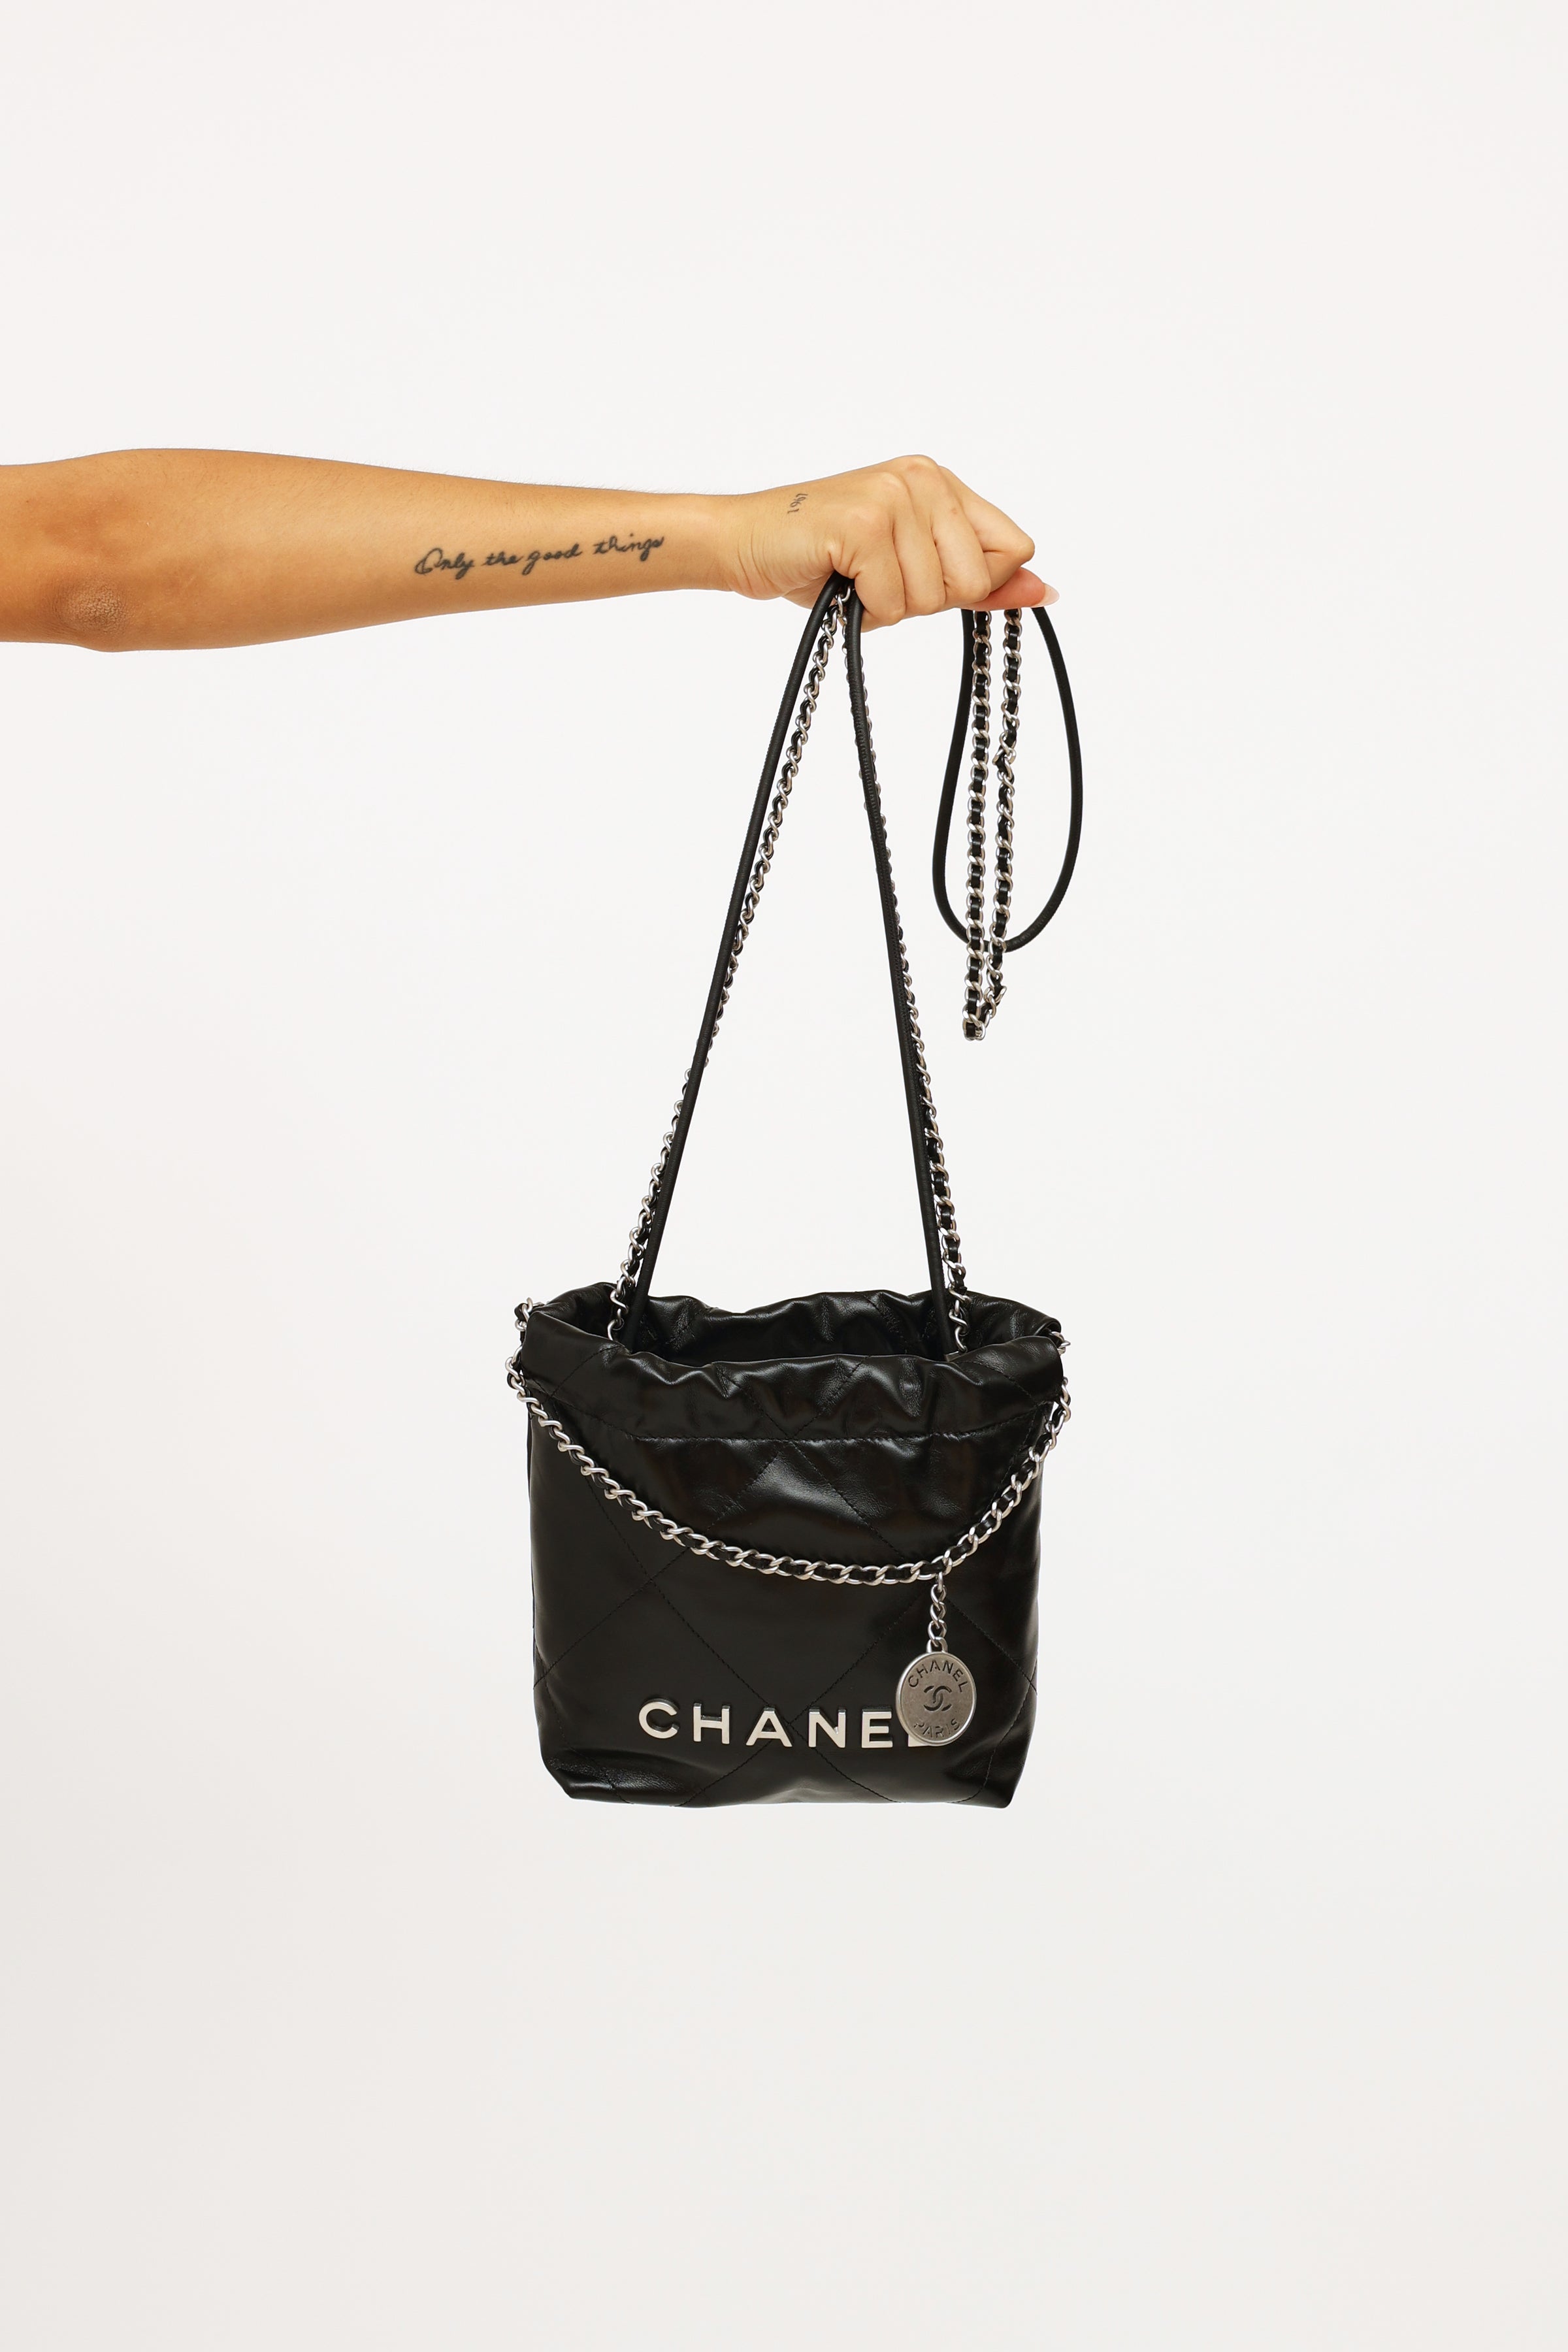 chanel bags clearance